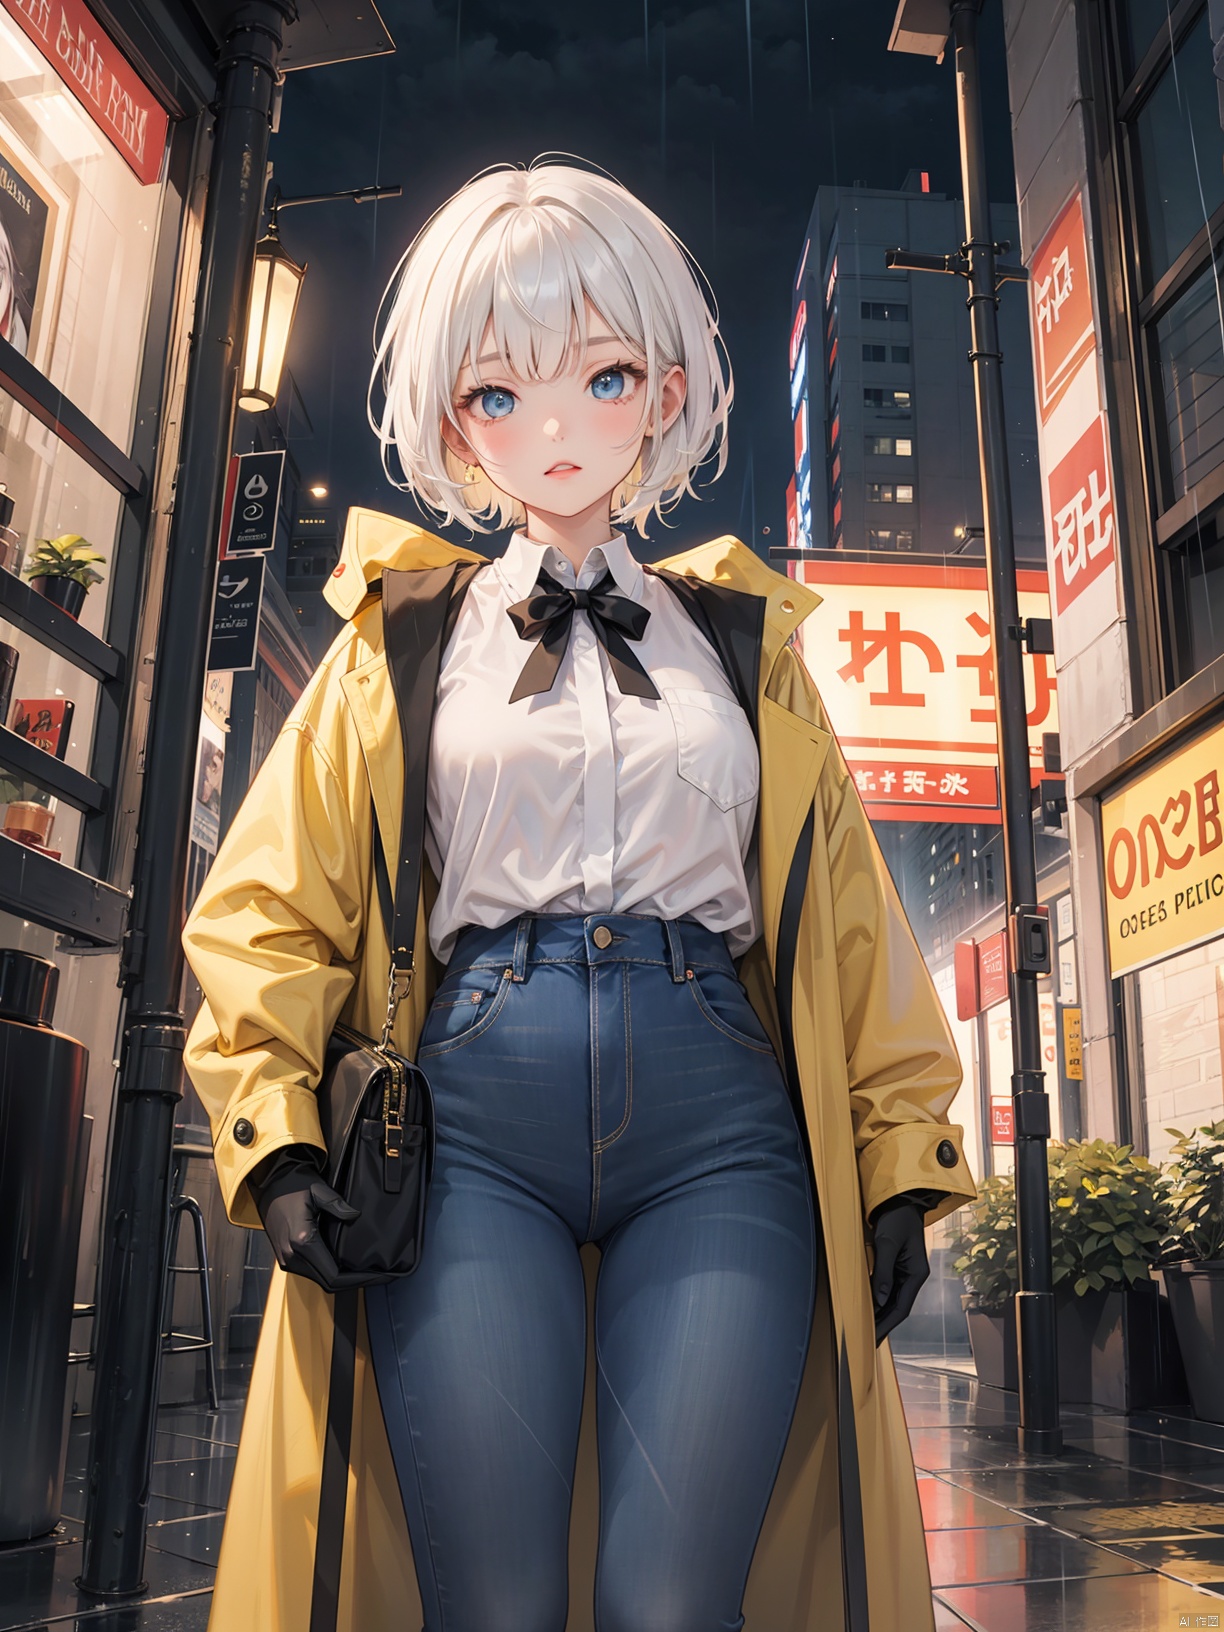  Golden short hair, girl, tall, blue eyes, thin, very tall, with a yellow and black coat, uniform, white shirt, jeans, black gloves, night, heavy rain